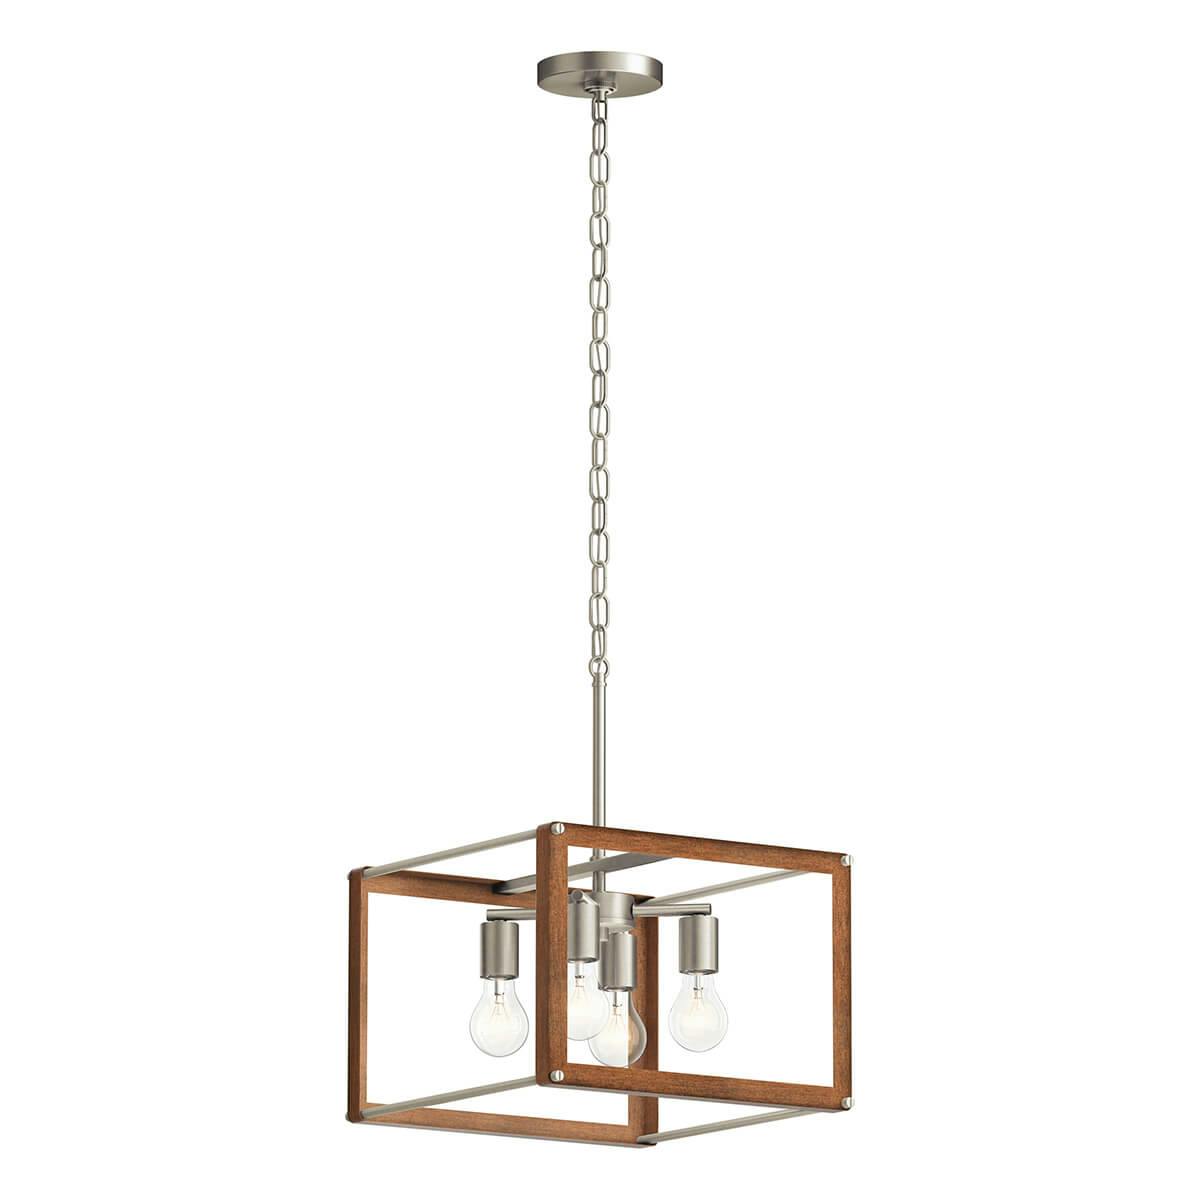 Chatwin 4 Light Square Pendant Brushed Nickel on a white background